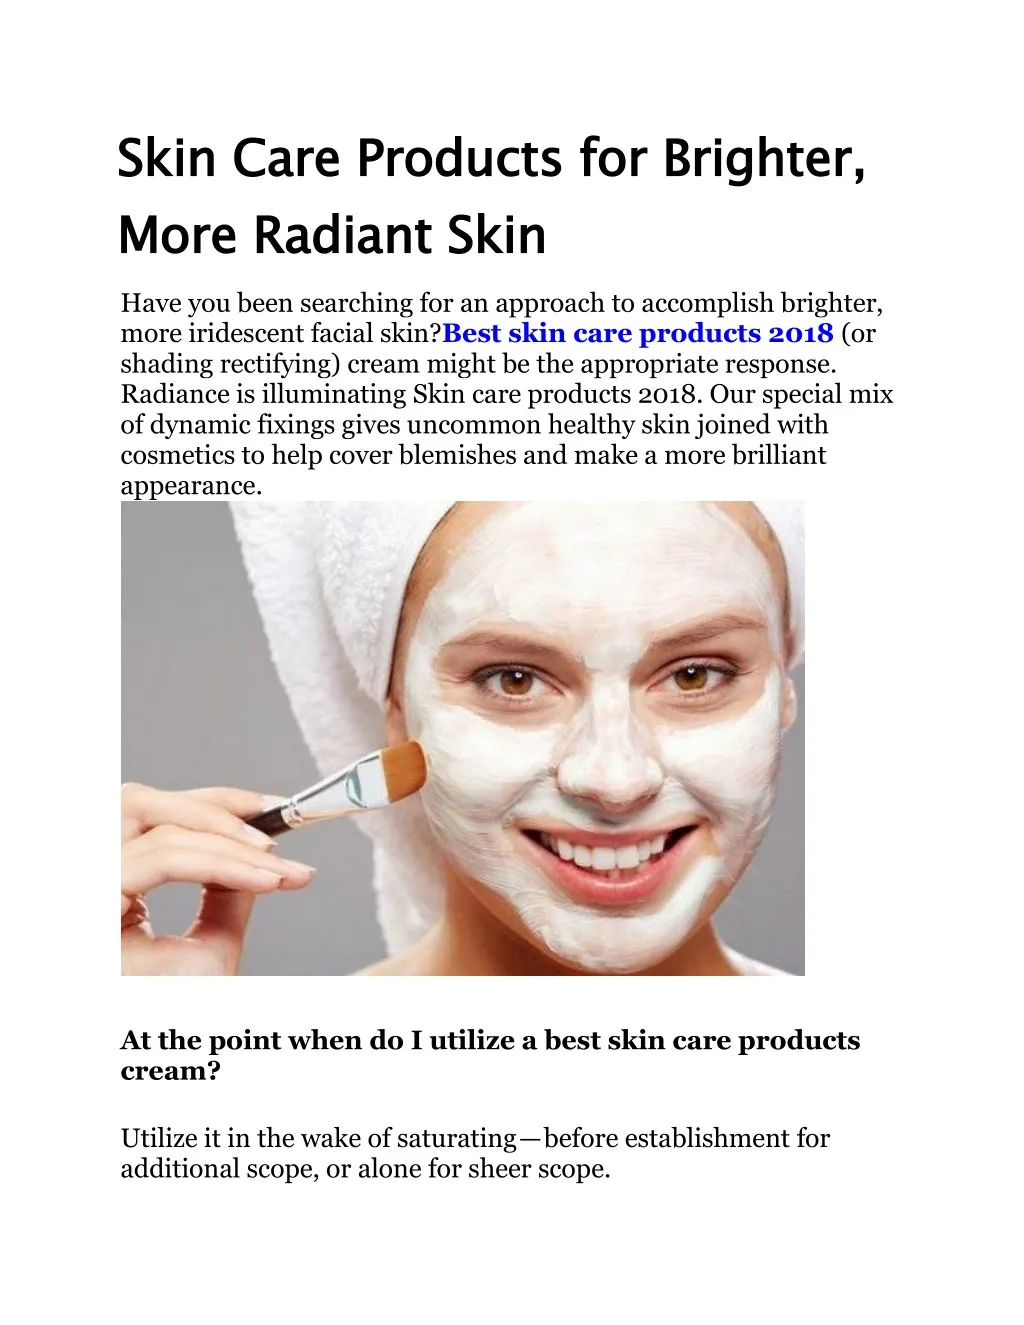 skin care products for brighter more radiant have